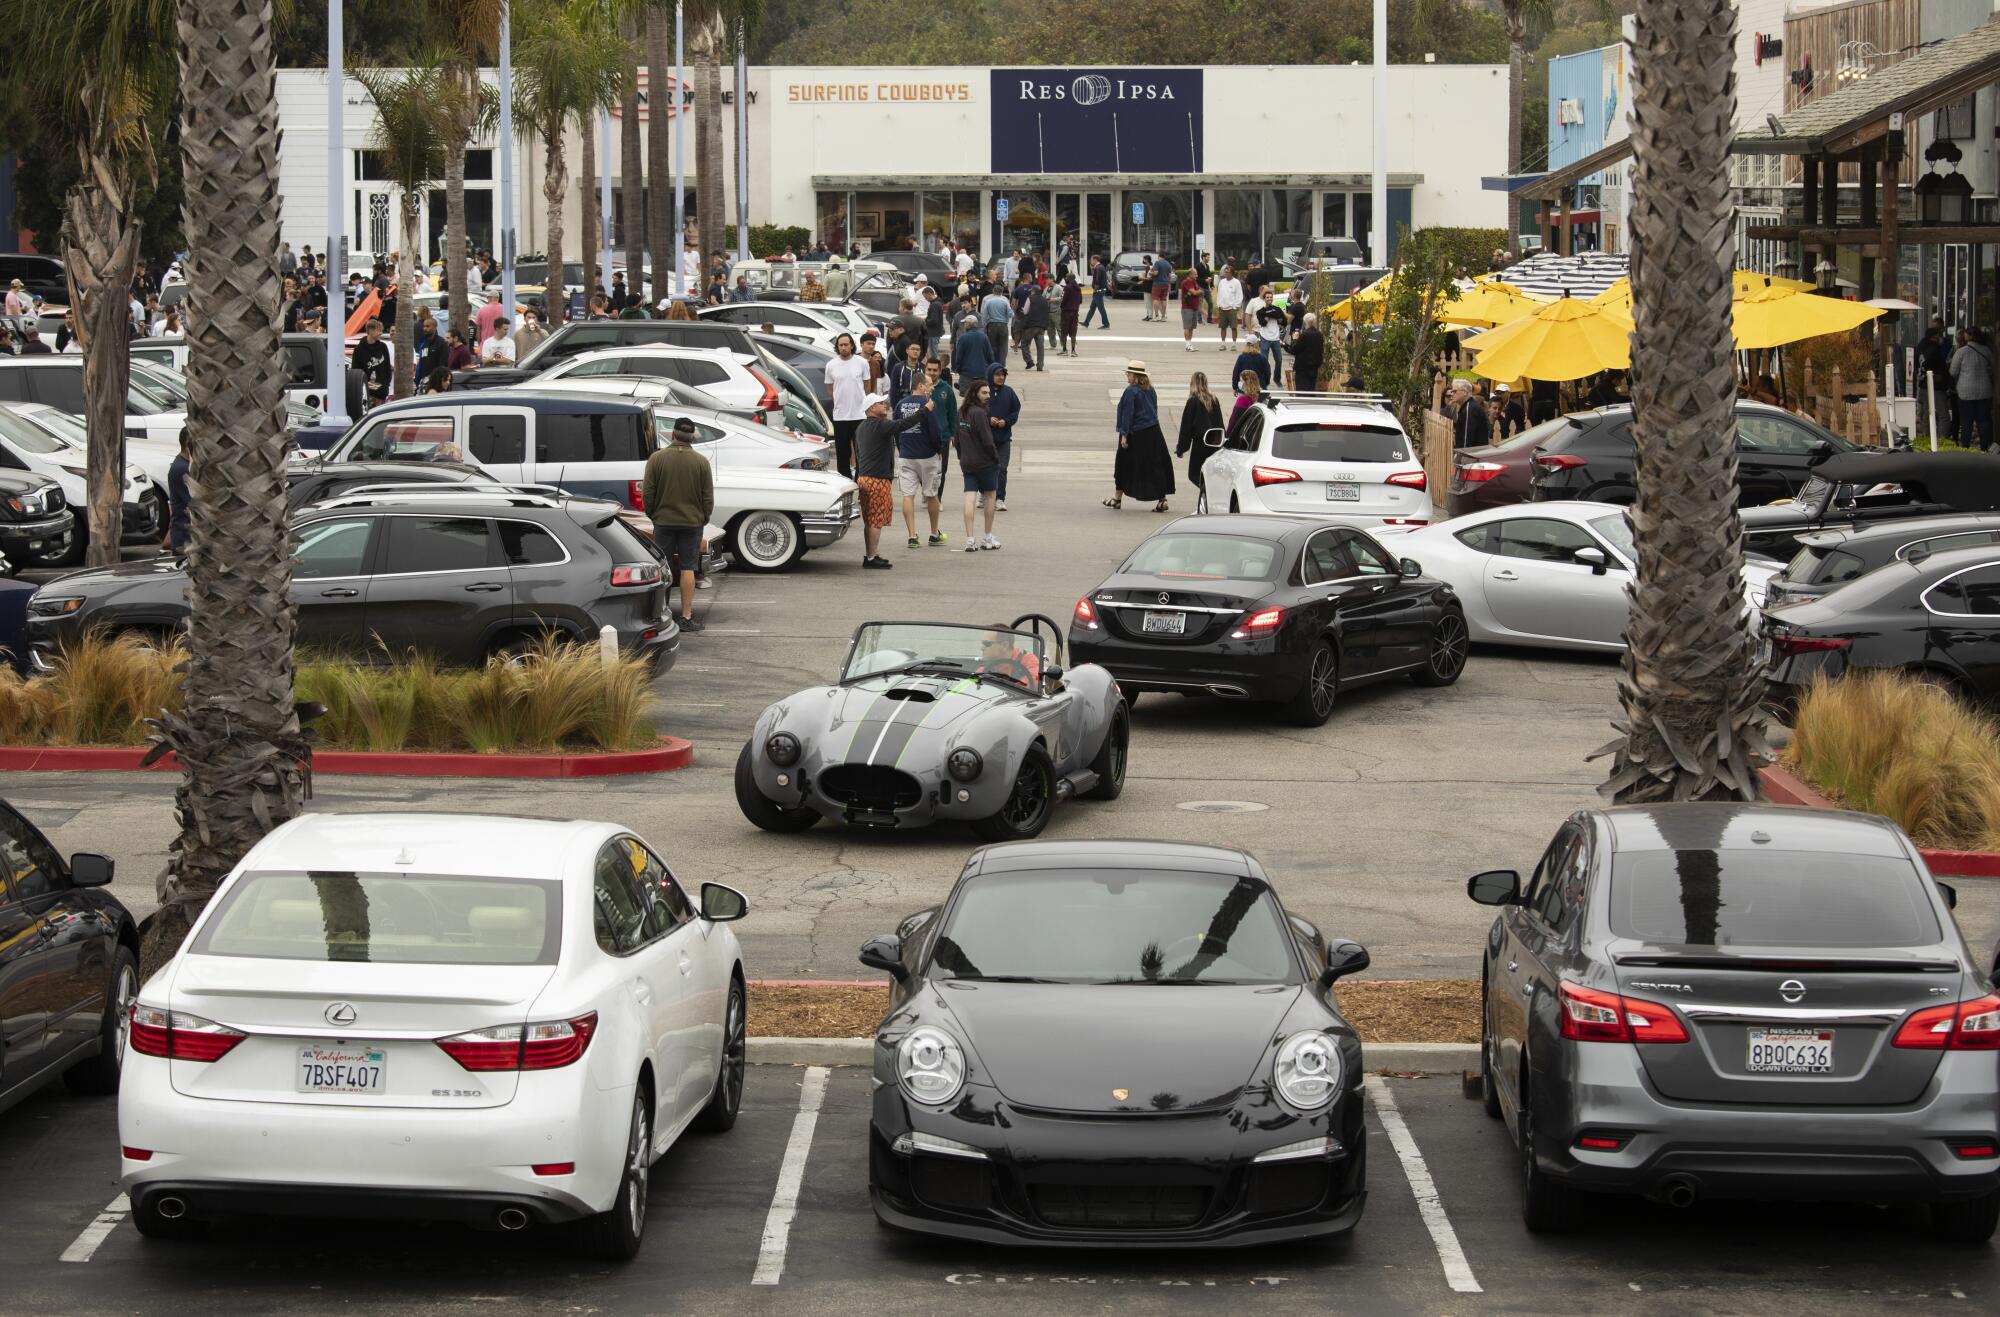 The parking lot at Malibu Village Shopping Mall is filled to capacity with car enthusiasts and customers vying for spots.